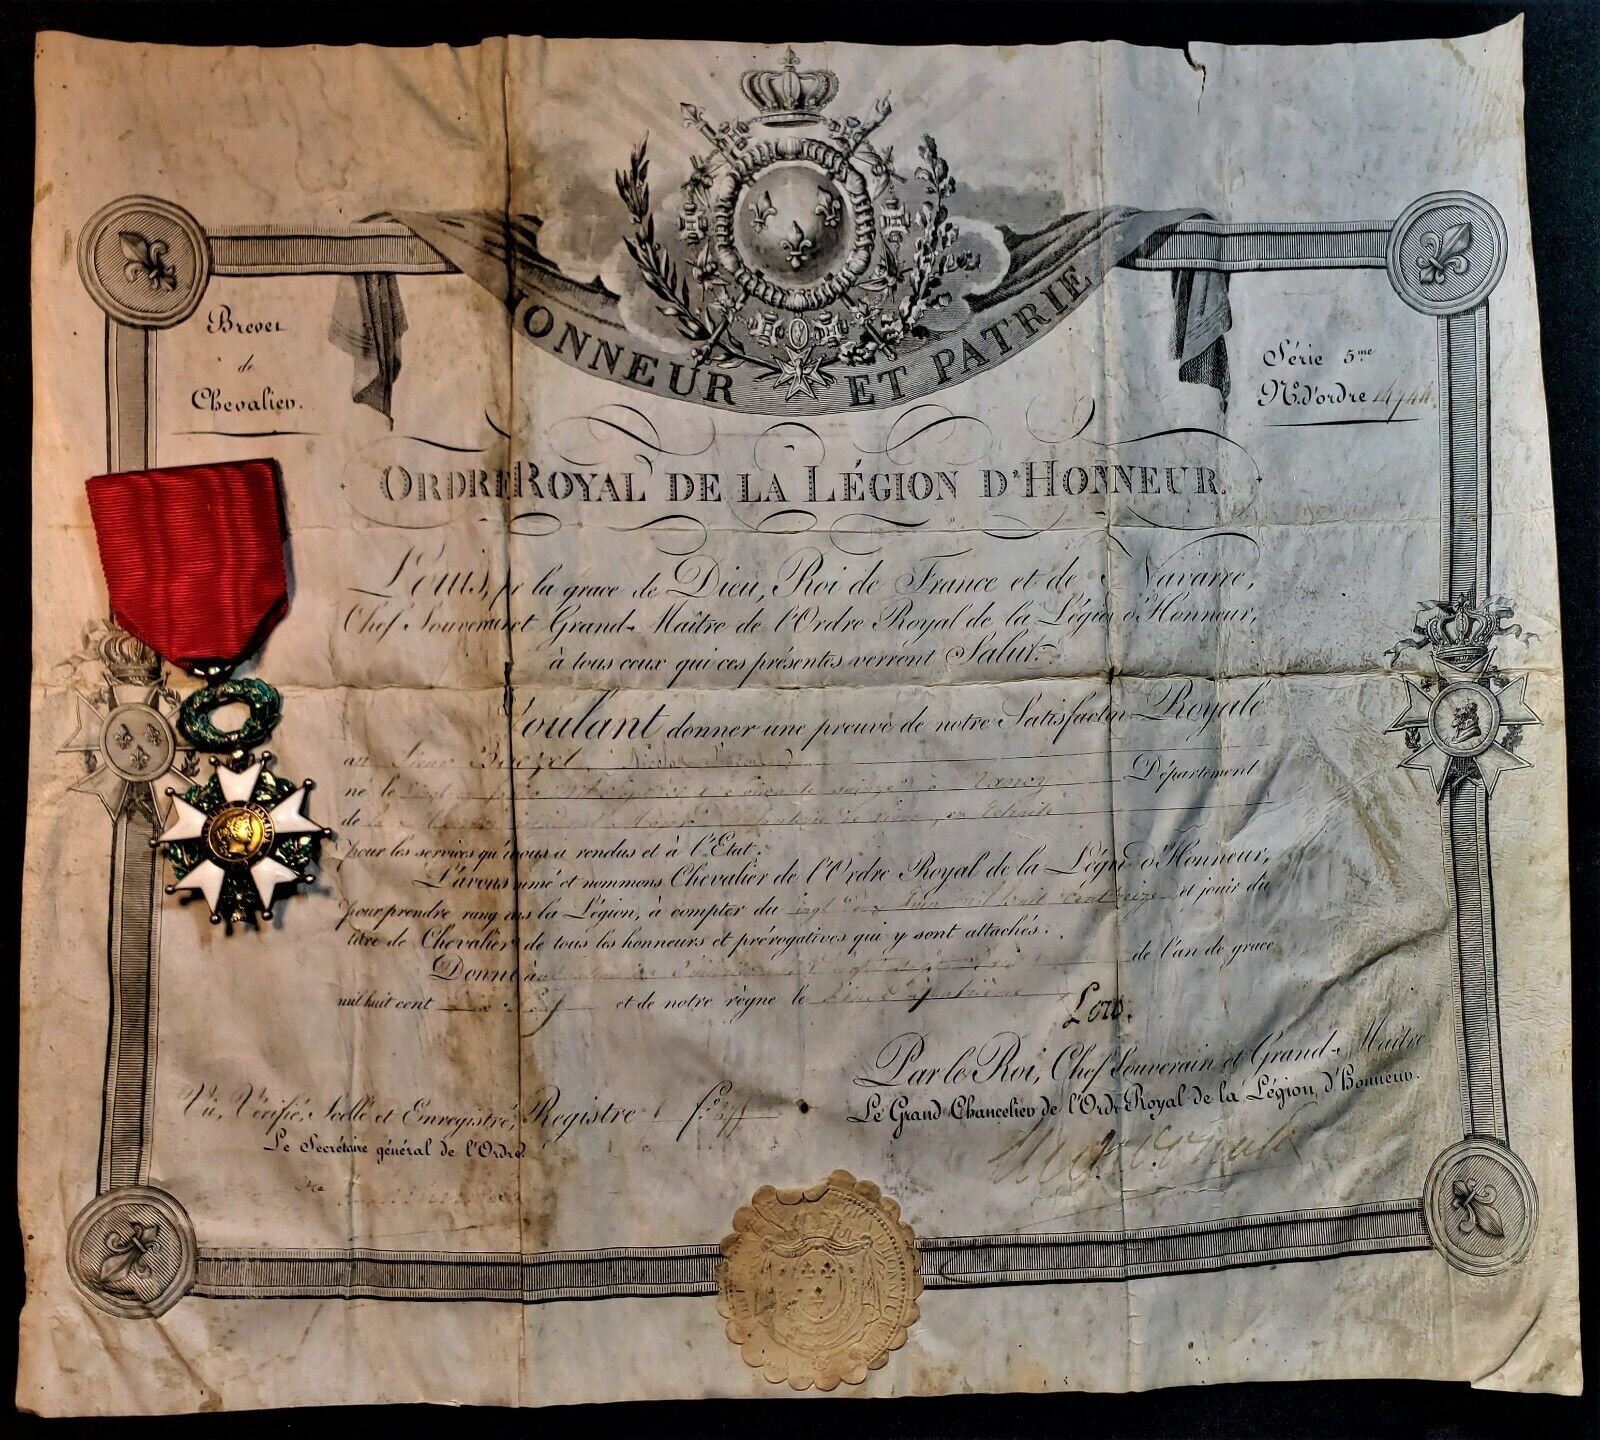 KING LOUIS XVIII SIGNED KNIGHT PATENT DIPLOMA & ORDER OF LEGION OF HONOR - 1813